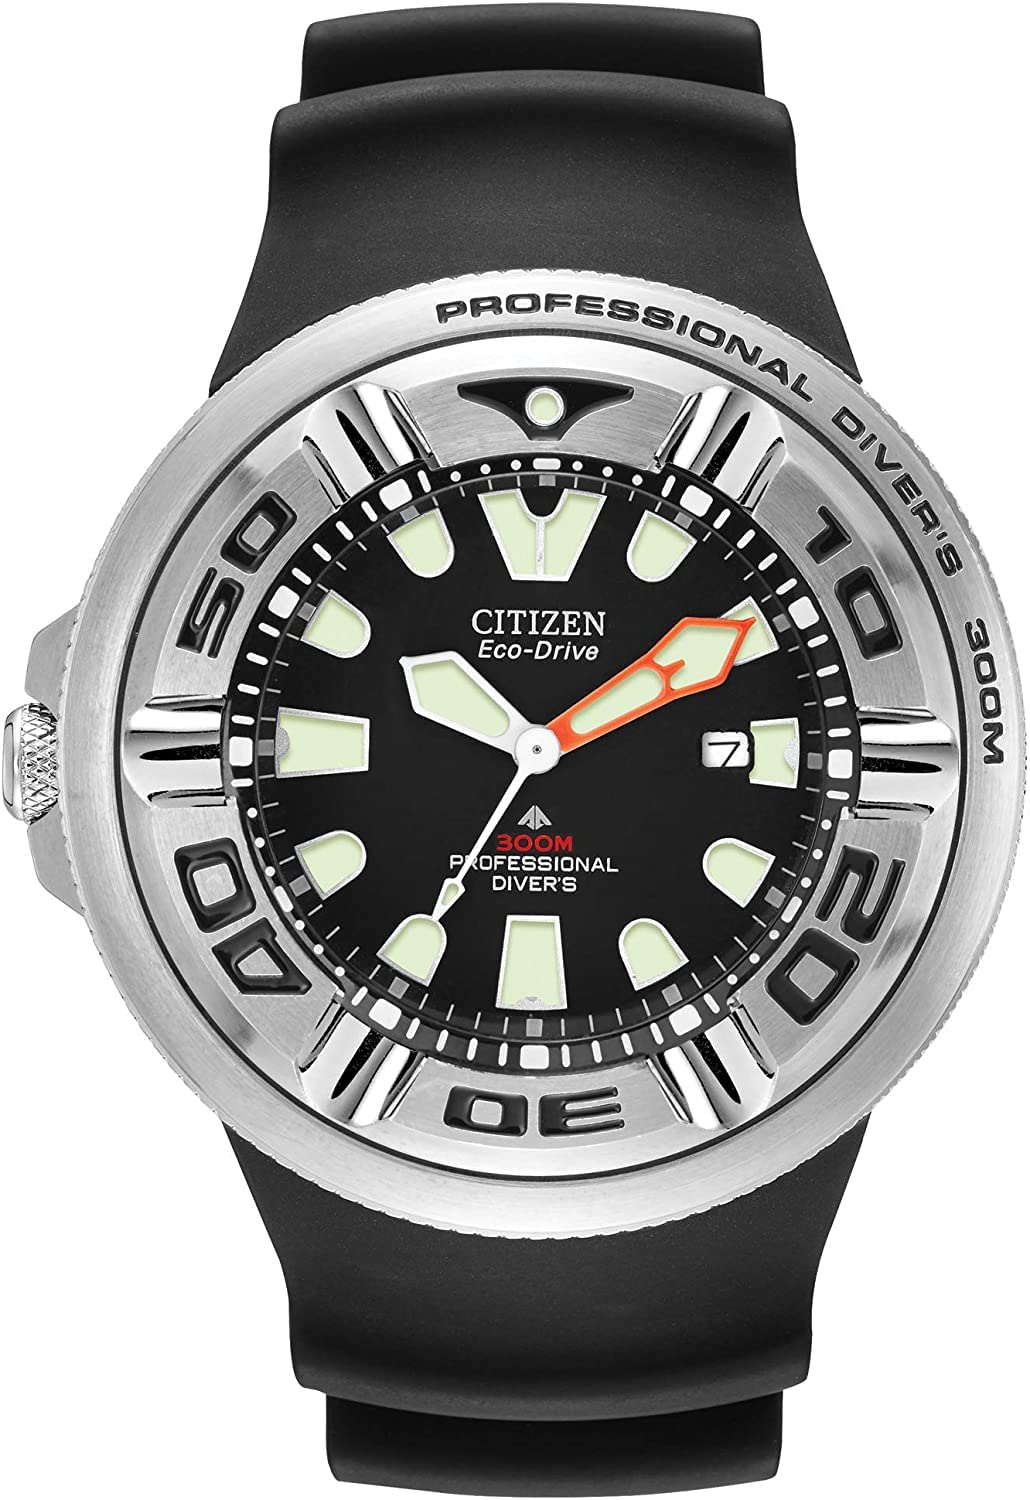 Citizen Men's Promaster Dive Eco-Drive Watch, 3-Hand Date, Polyurethane Strap, ISO Certified, Anti-Reflective Curved Crystal, Screw-Back Case and Crown